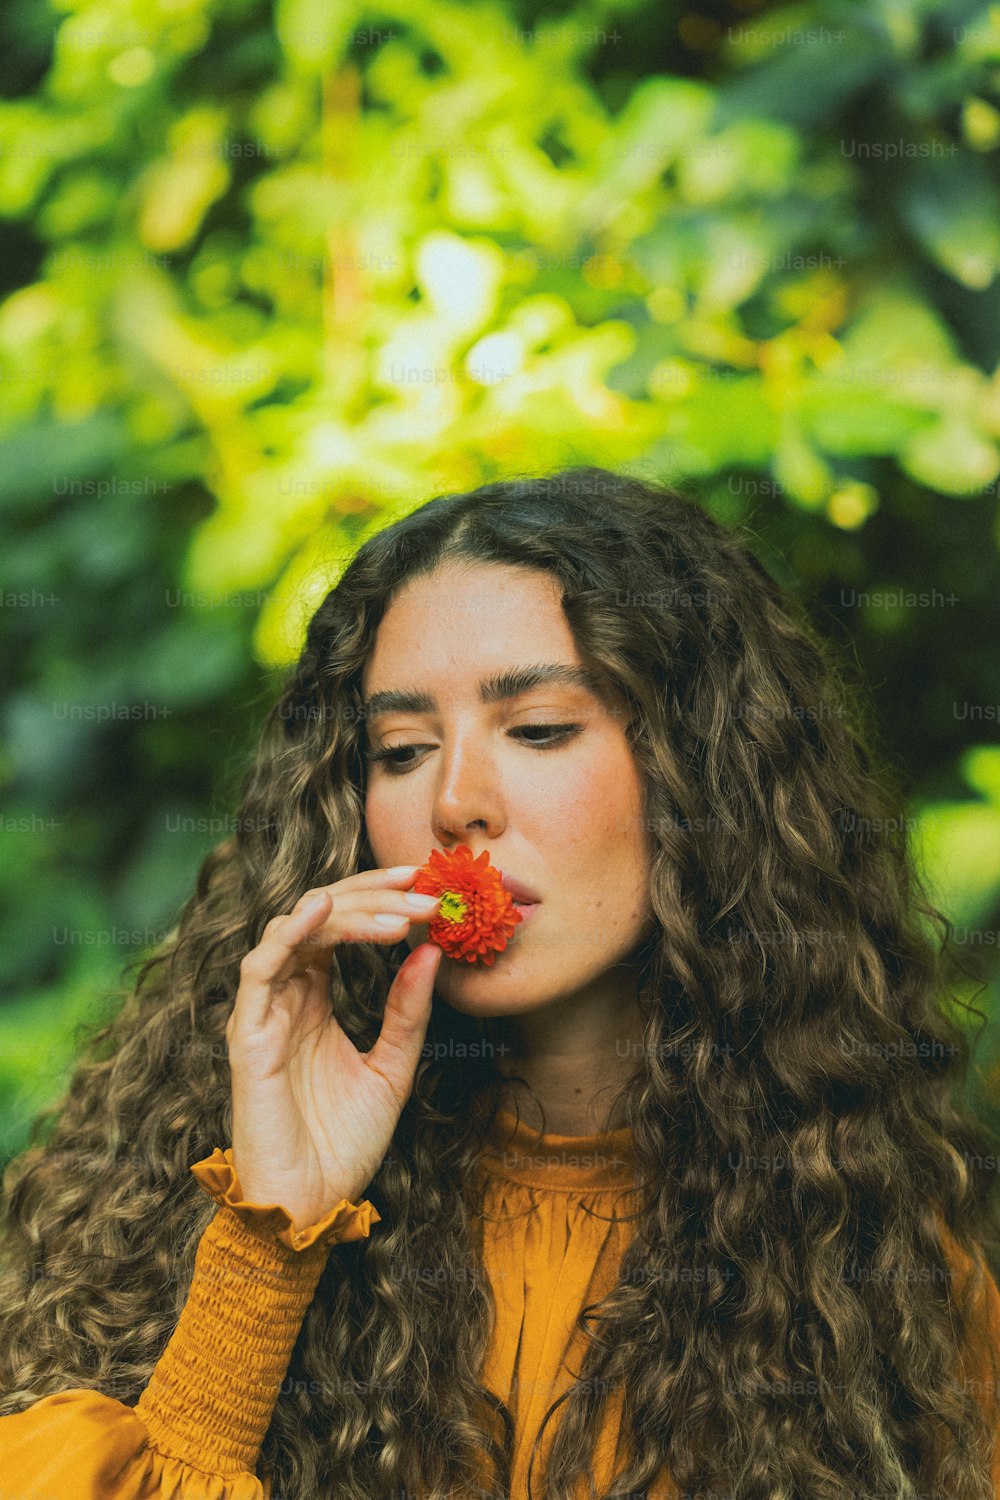 a woman with long curly hair holding a flower in her mouth